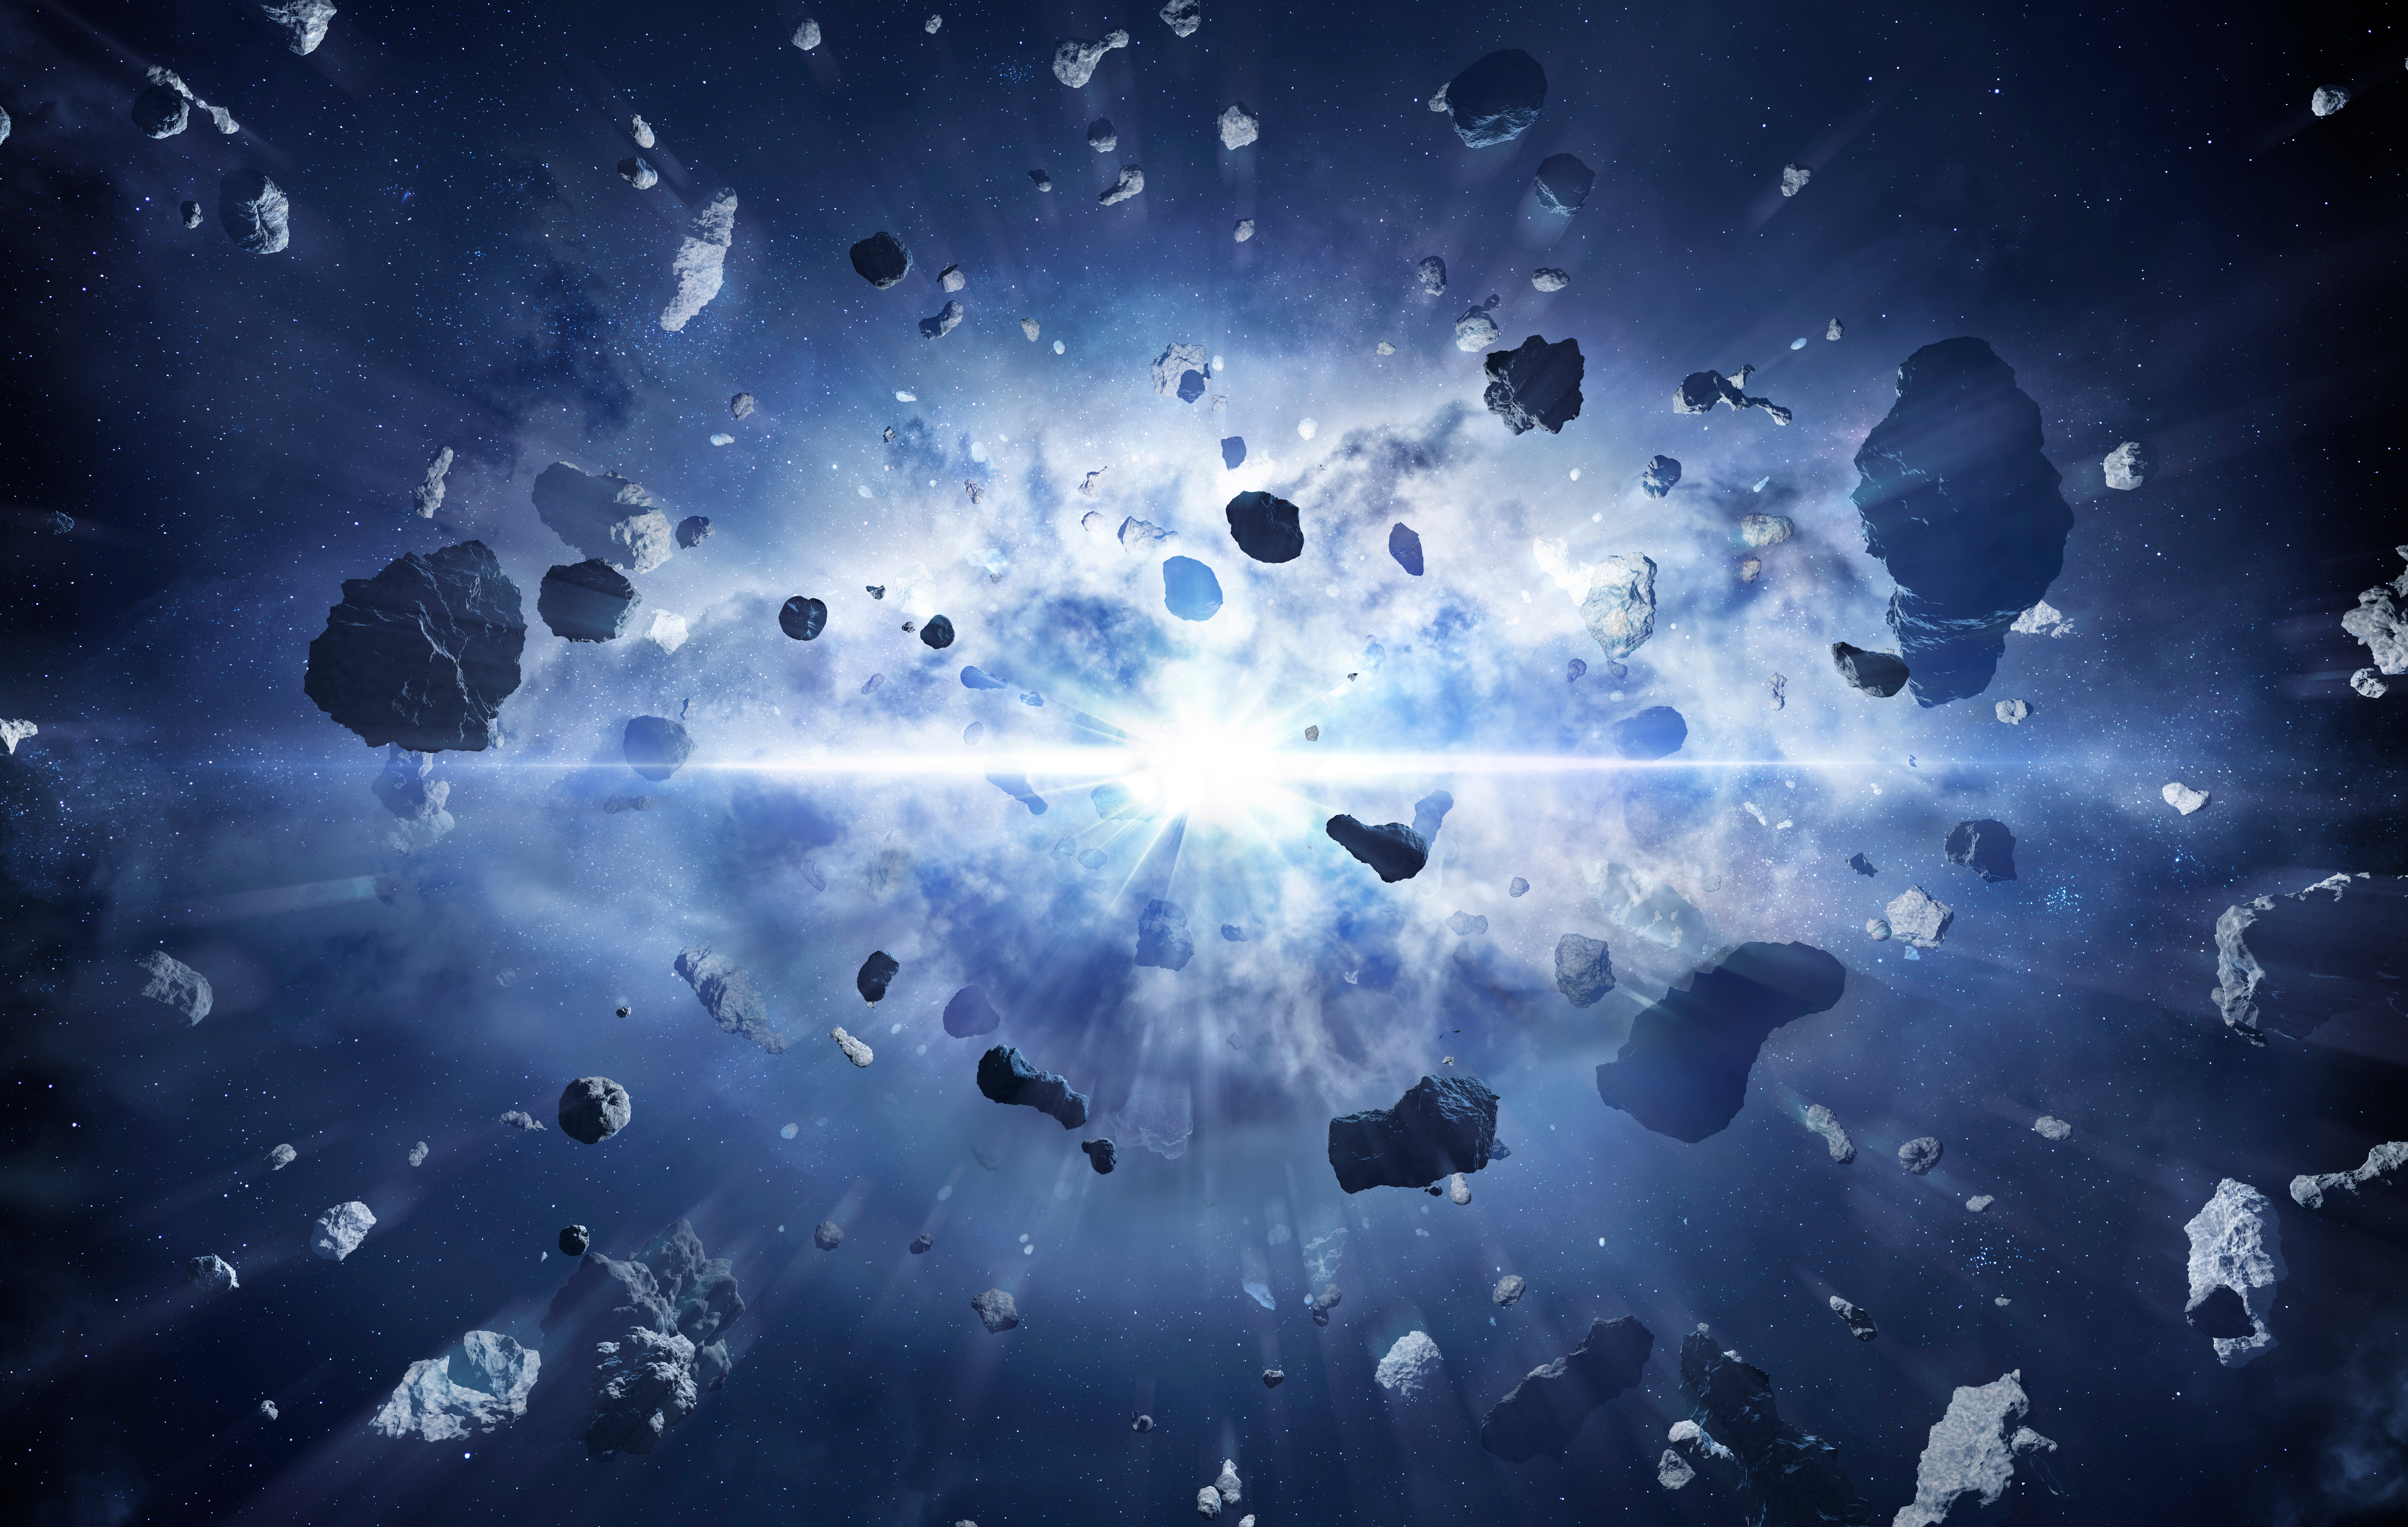 Big Bang Explosion - Time Warp In Universe - Contain 3d Rendering